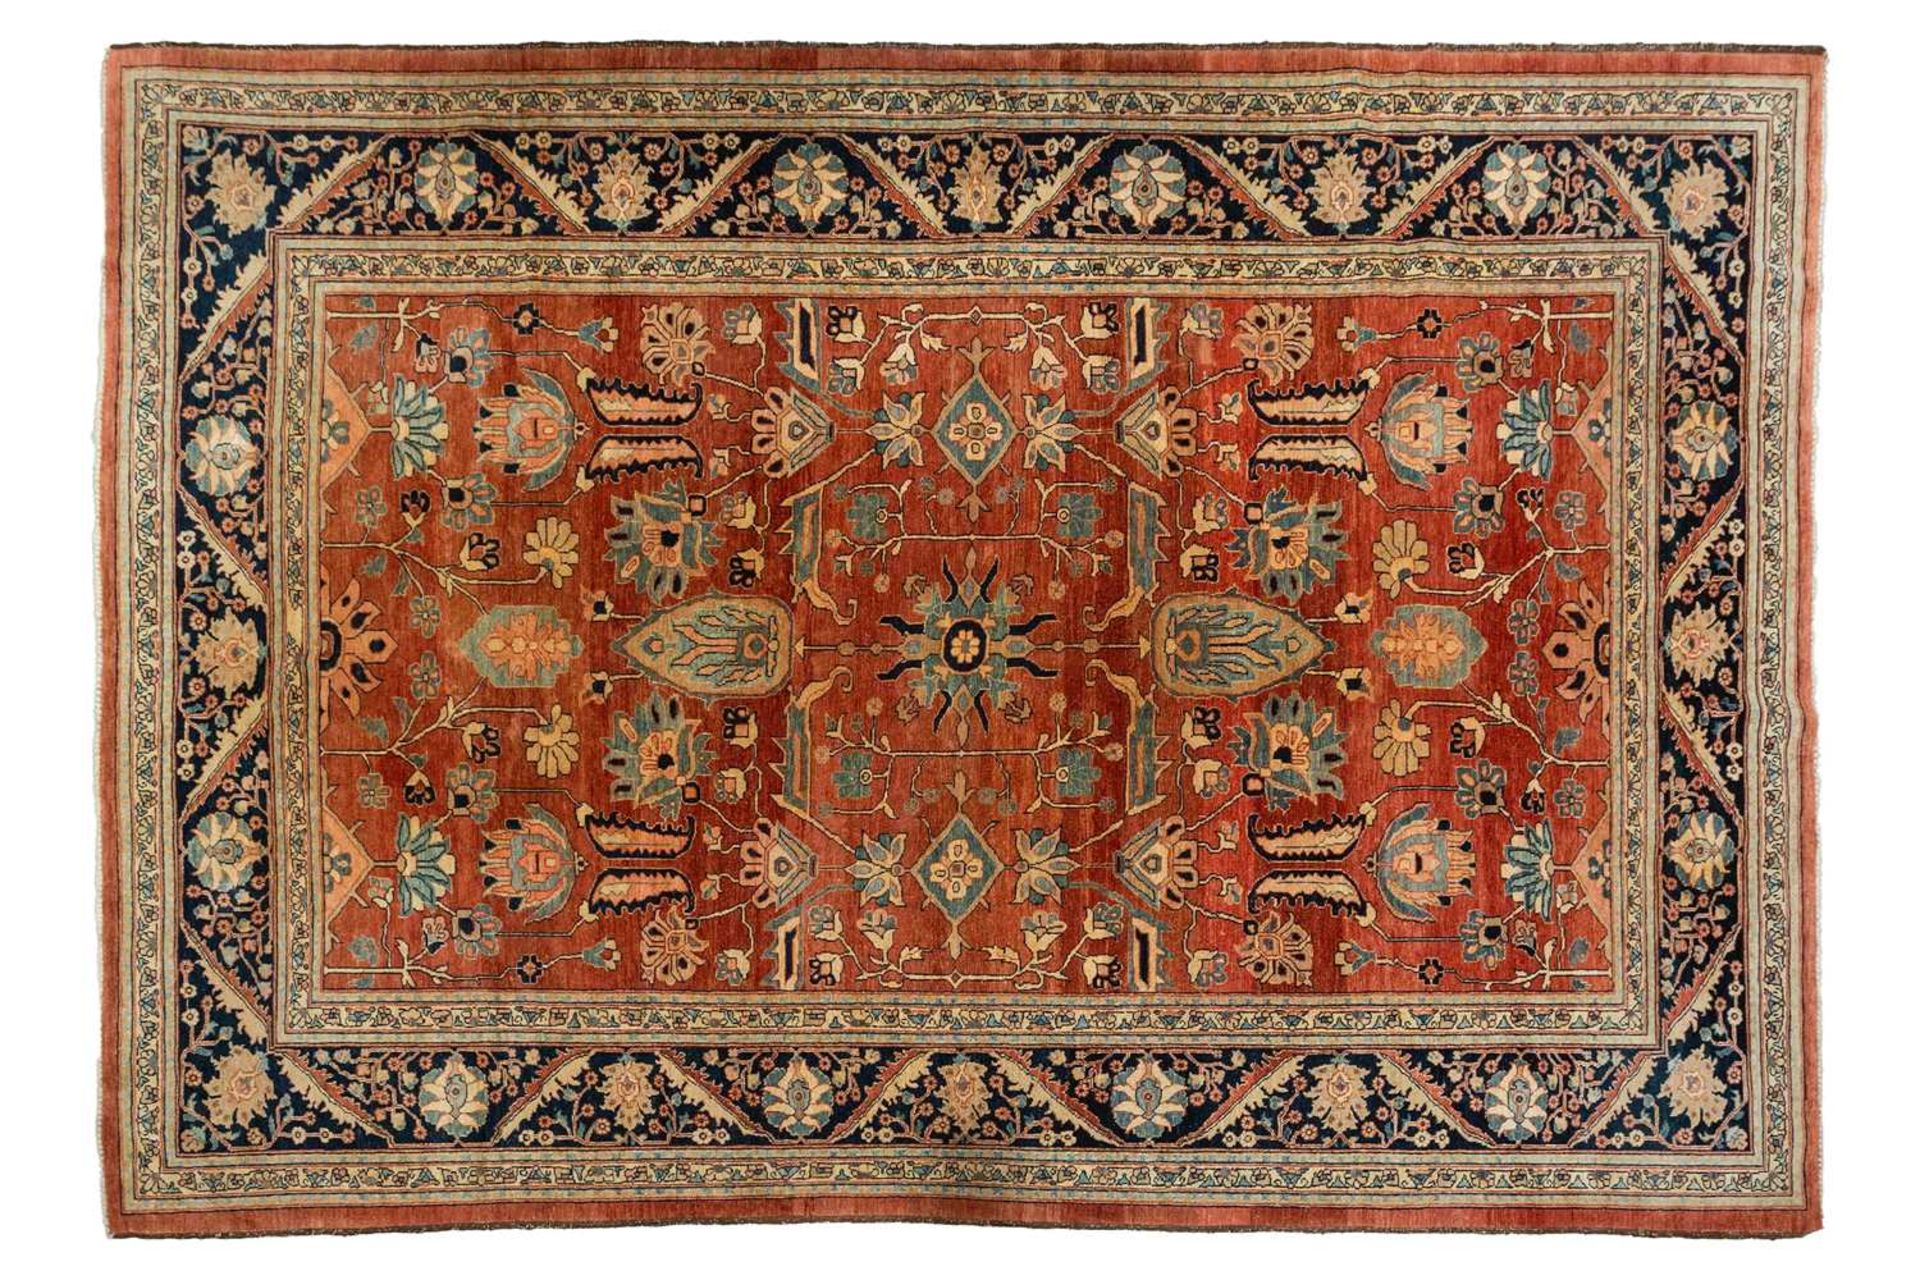 A large brick red ground Serapi-style carpet , 20th century, with central boss and geometric flowers